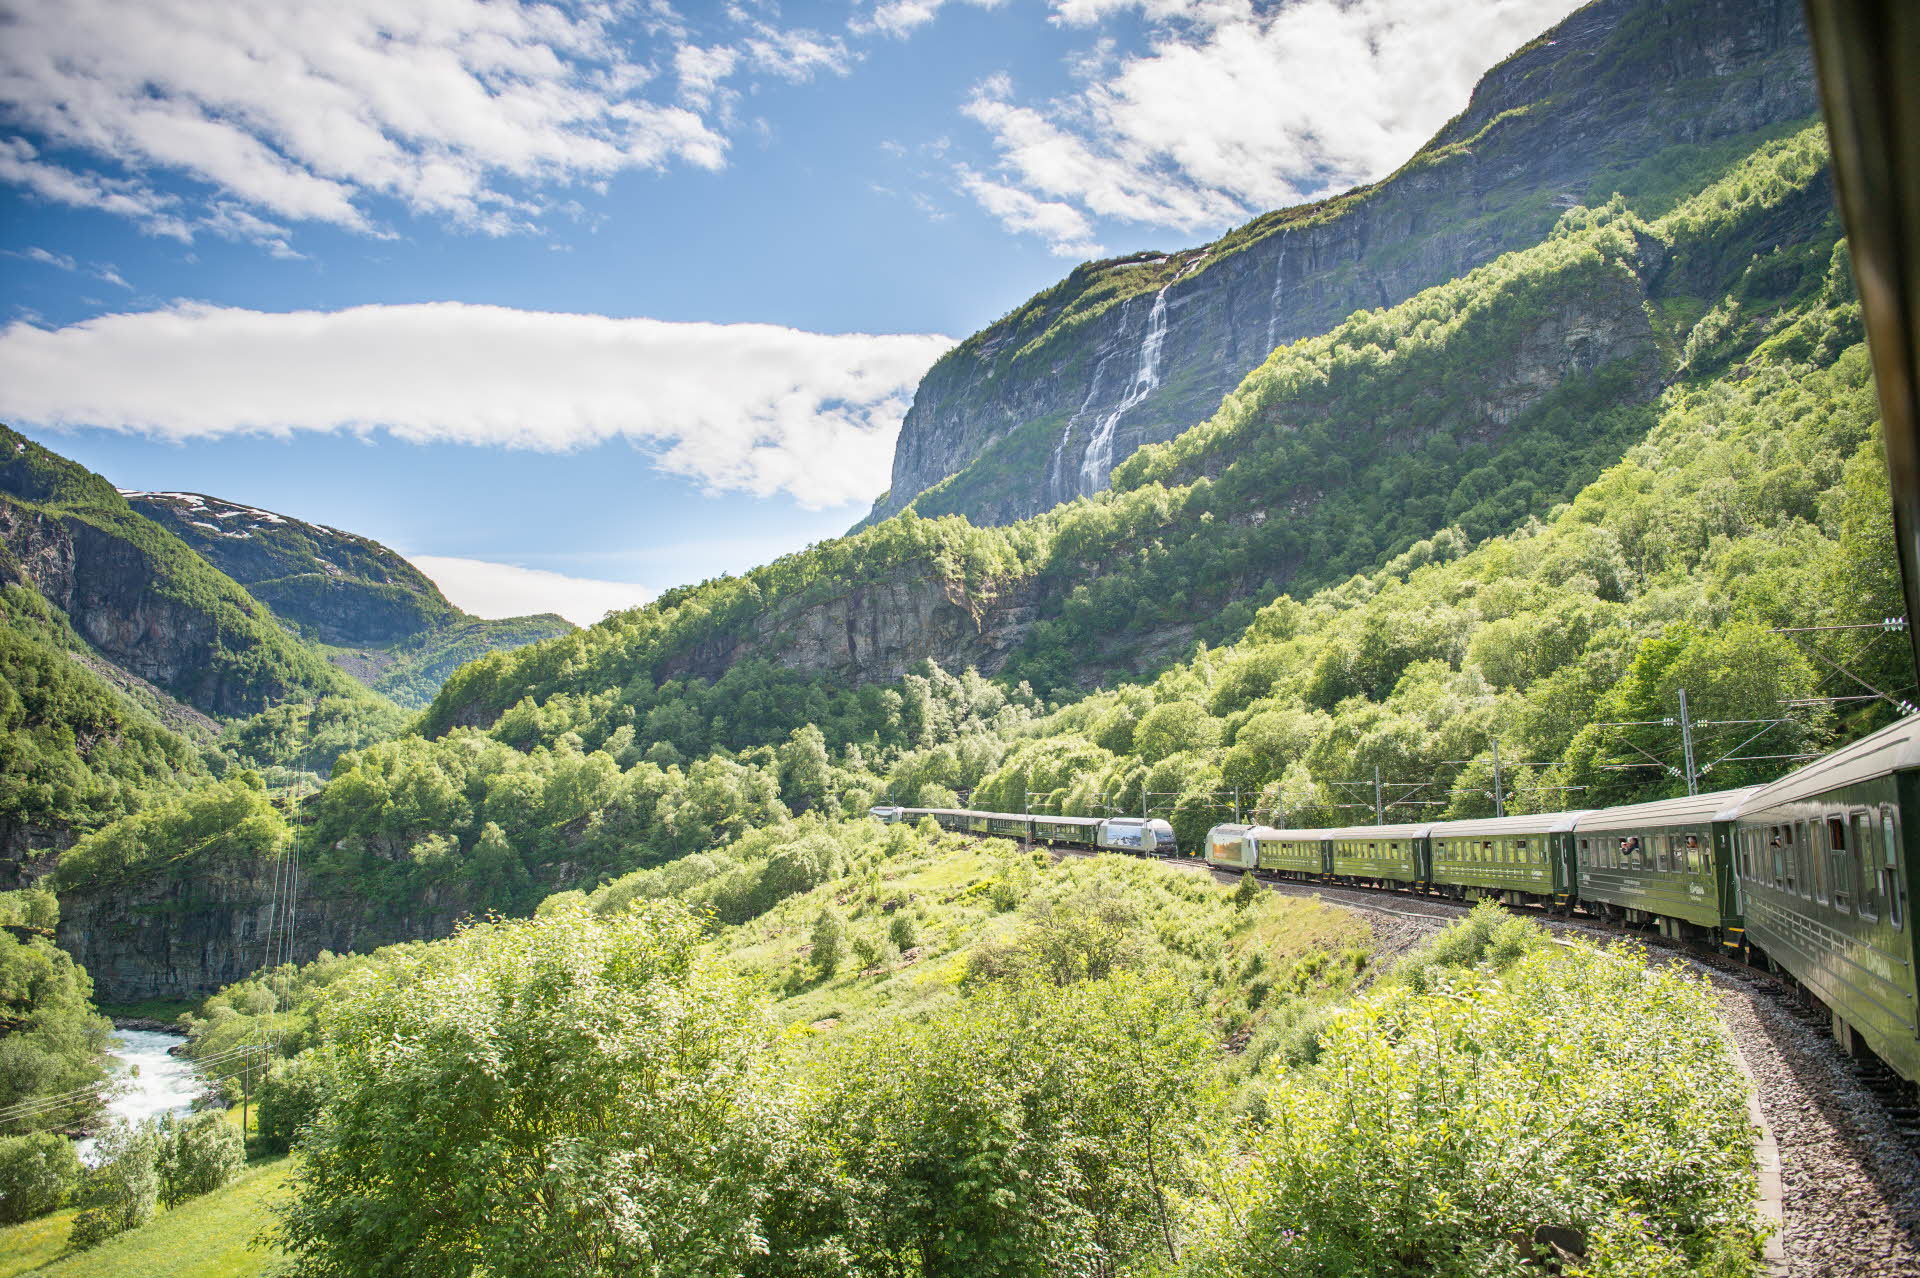 The Flåm Valley and two trains meeting – seen from a train window. Green slopes, blue sky and a waterfall. 